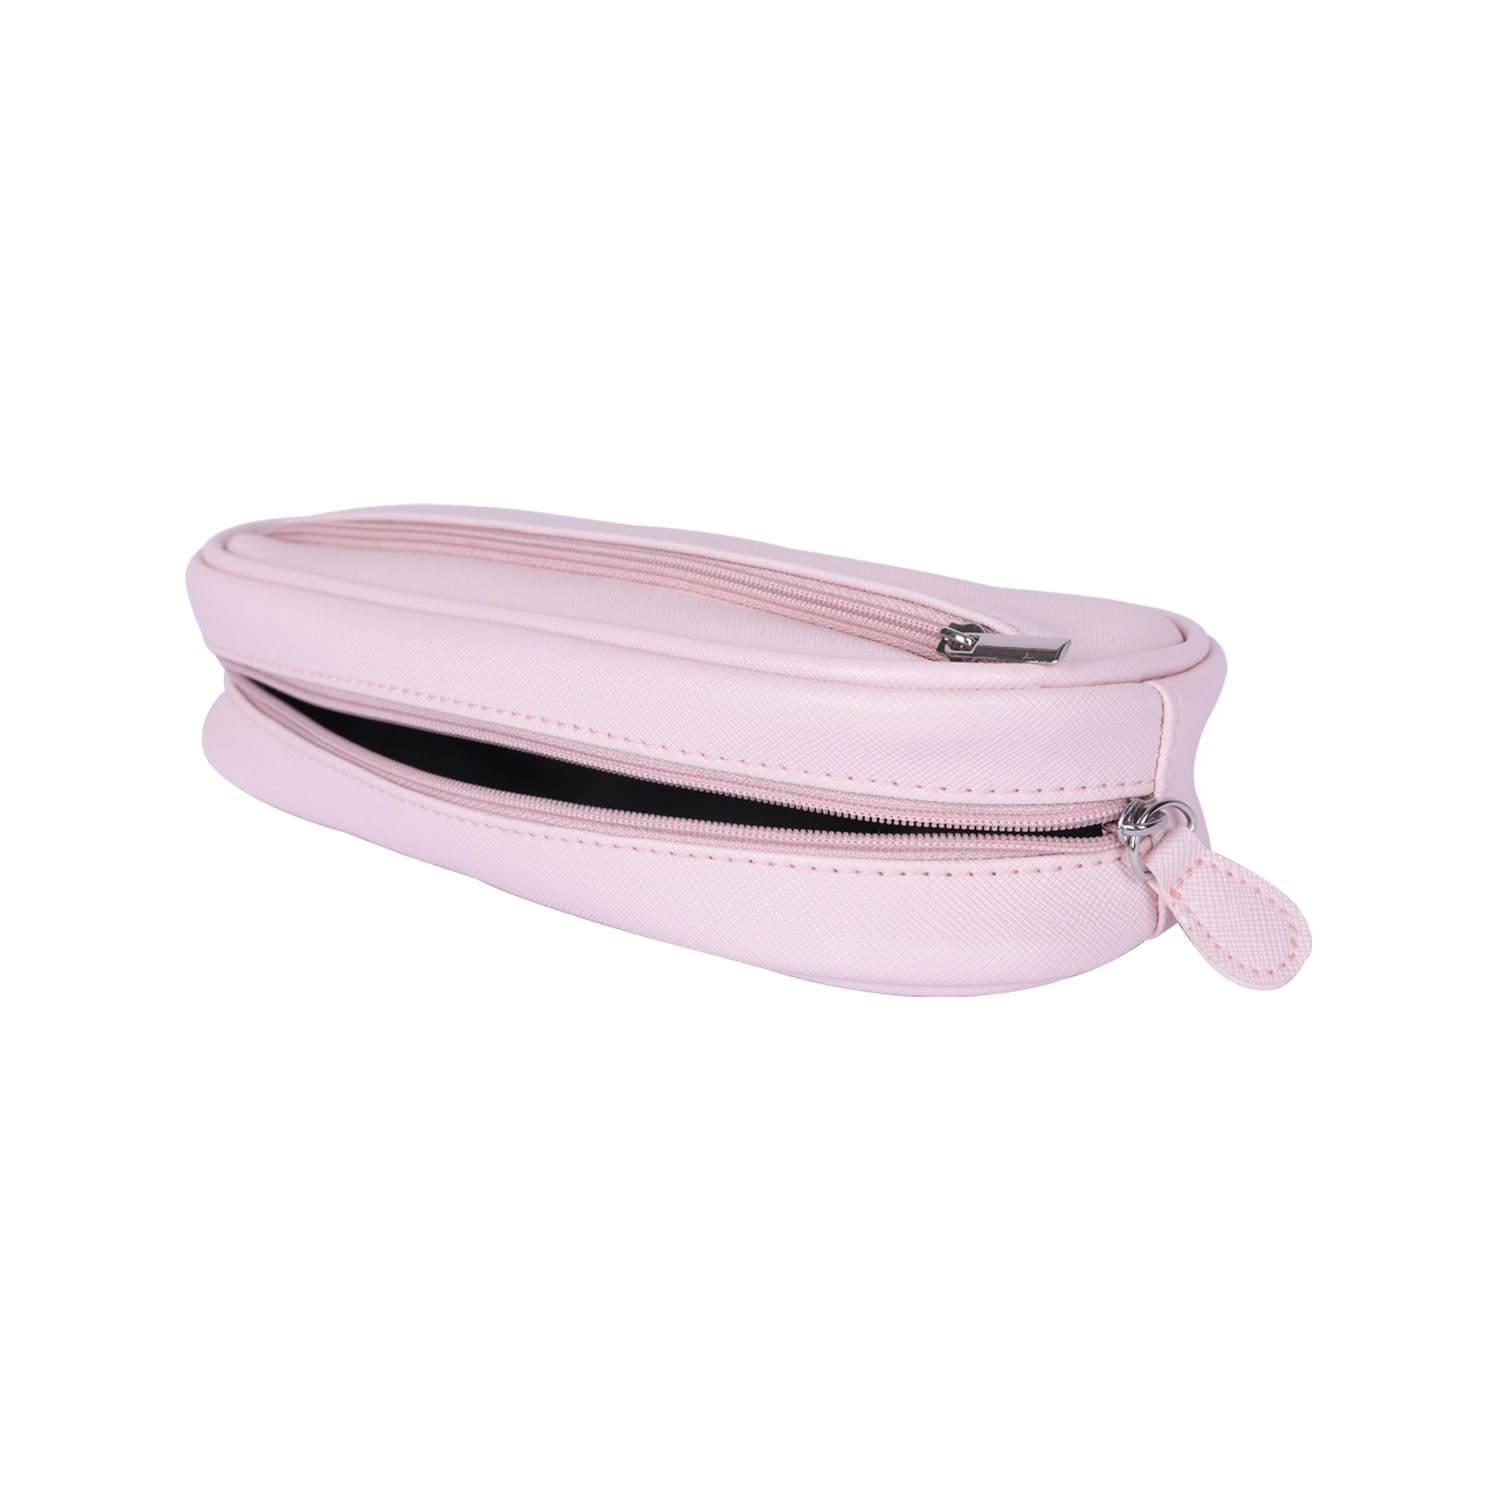 Pink Lovely Pancil Case PU Pen Case Student Stationery Pouch Cosmetic Mackup Bag Beauty Case